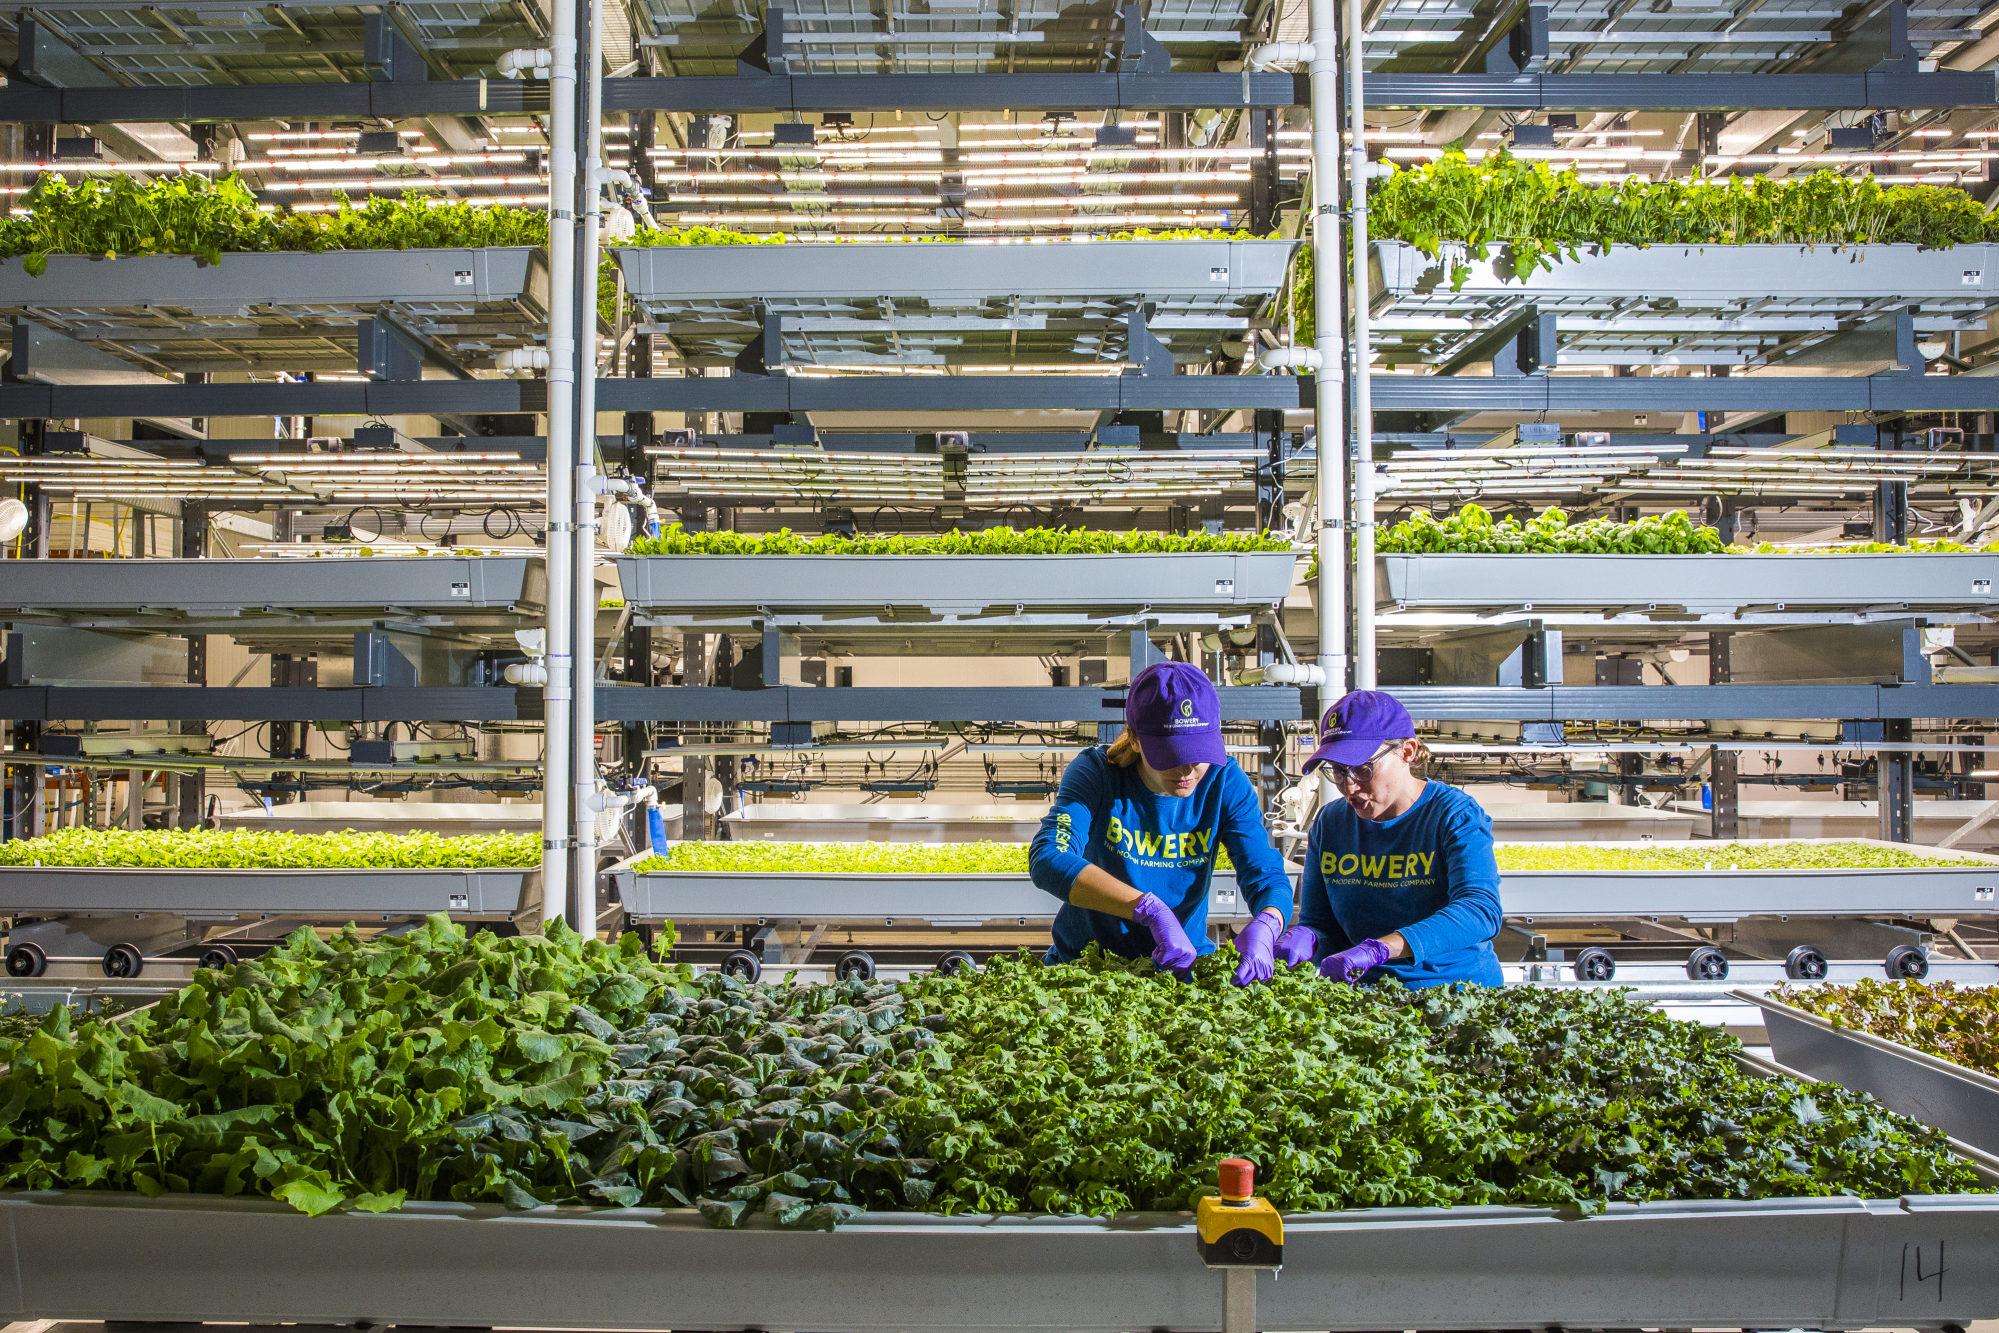 Farmers work at the Bowery Farming Inc. indoor farm in Kearny, New Jersey.